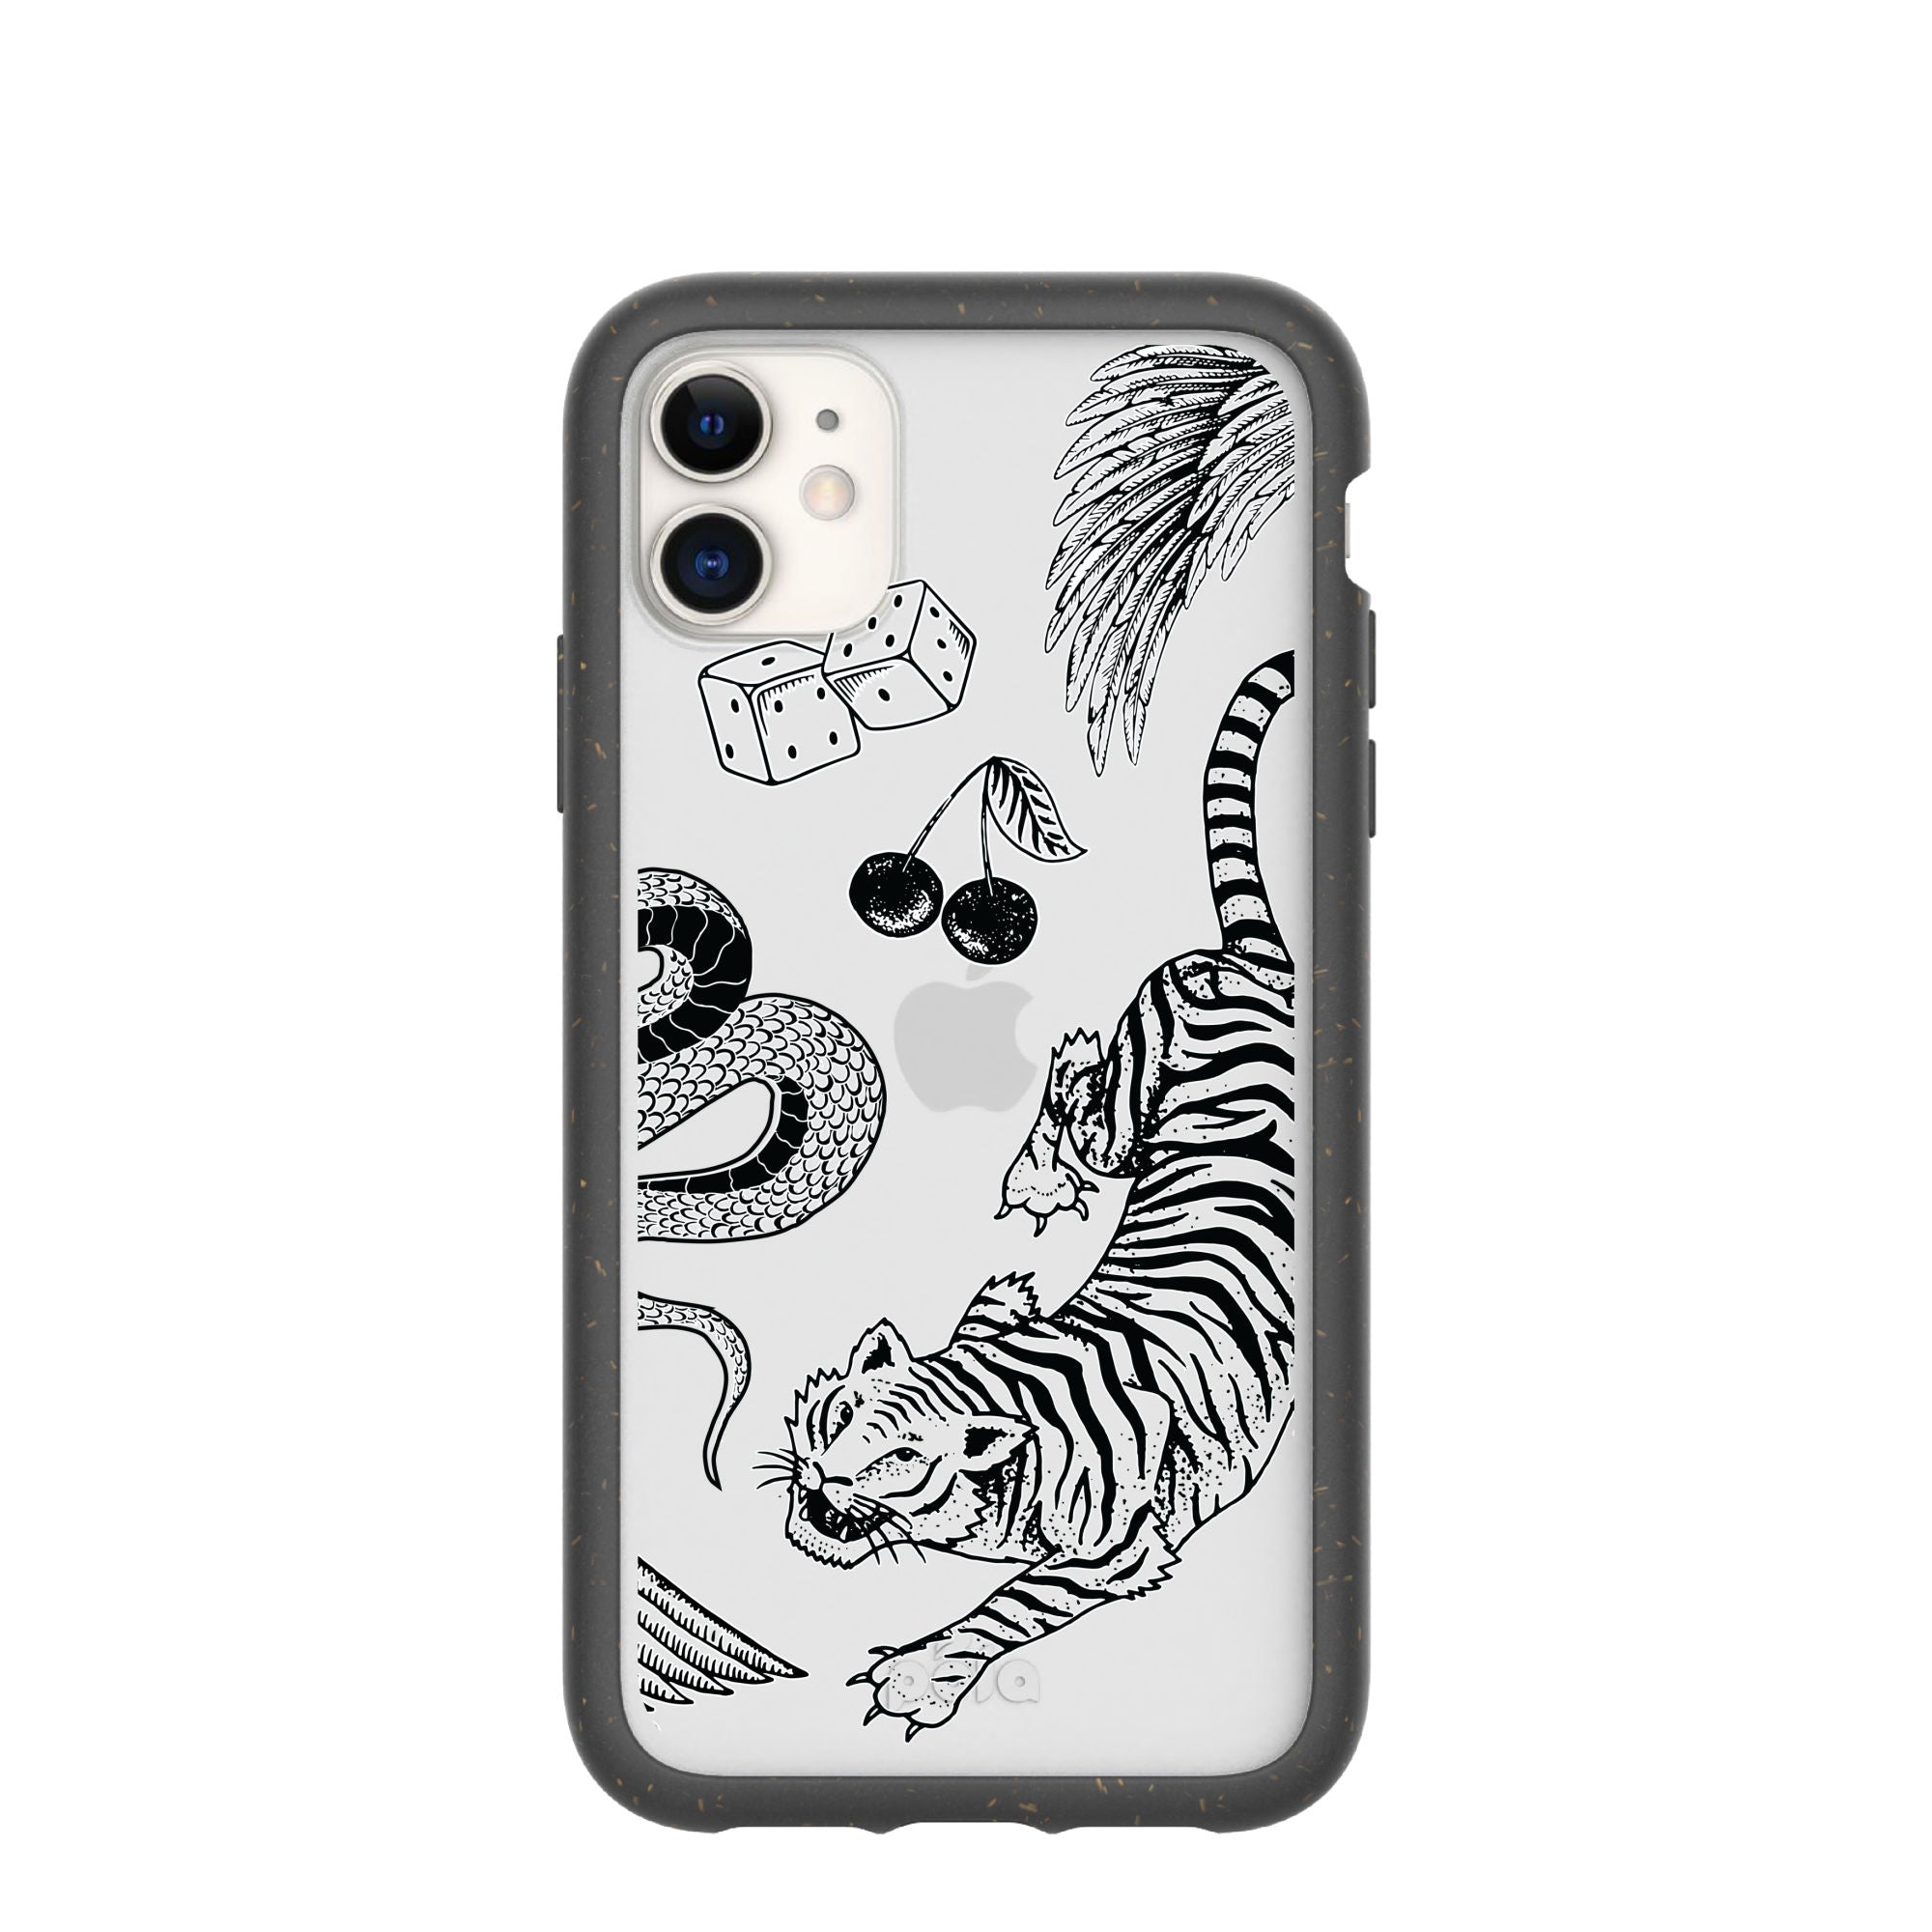 Clear Tiger Luck iPhone 11 Case With Black Ridge – Pela Case